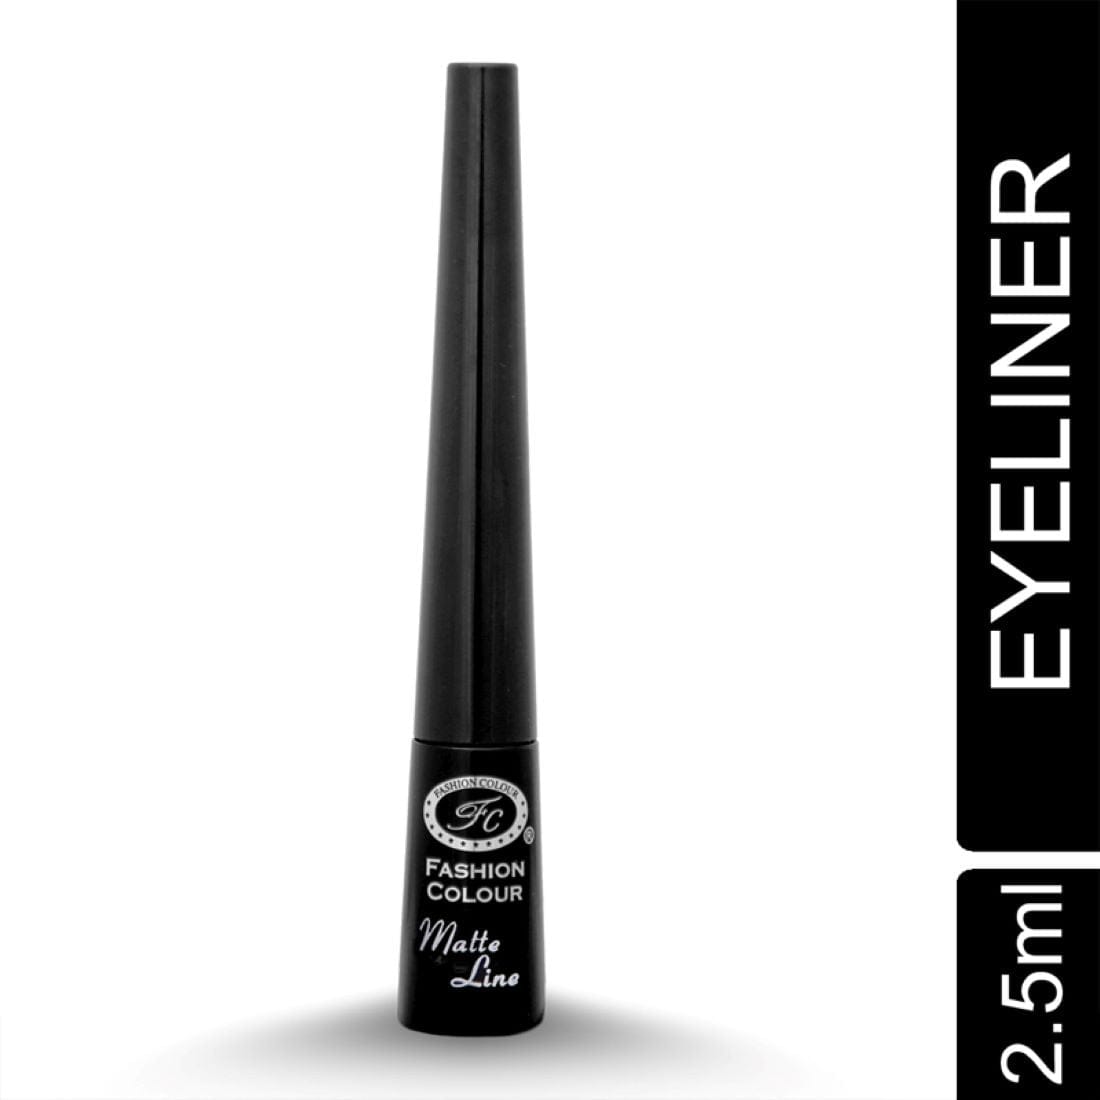 Mascara - One-touch brings you satisfactory MAX VOLUME CURL EFFECT. Mascara - Waterproof, Sweatproof, rather easy to remove by warm water. Eyeliner - Combined with the lasting nourishing formula, it cares for the skin around the eyes as well, it's waterproof and not DIZZY CATCH, give you clear and sexy beautiful eyes. Eyeliner - The slim tip helps to outline clear lines precisely, presents deep shiny and bright vivid big eyes after line up.